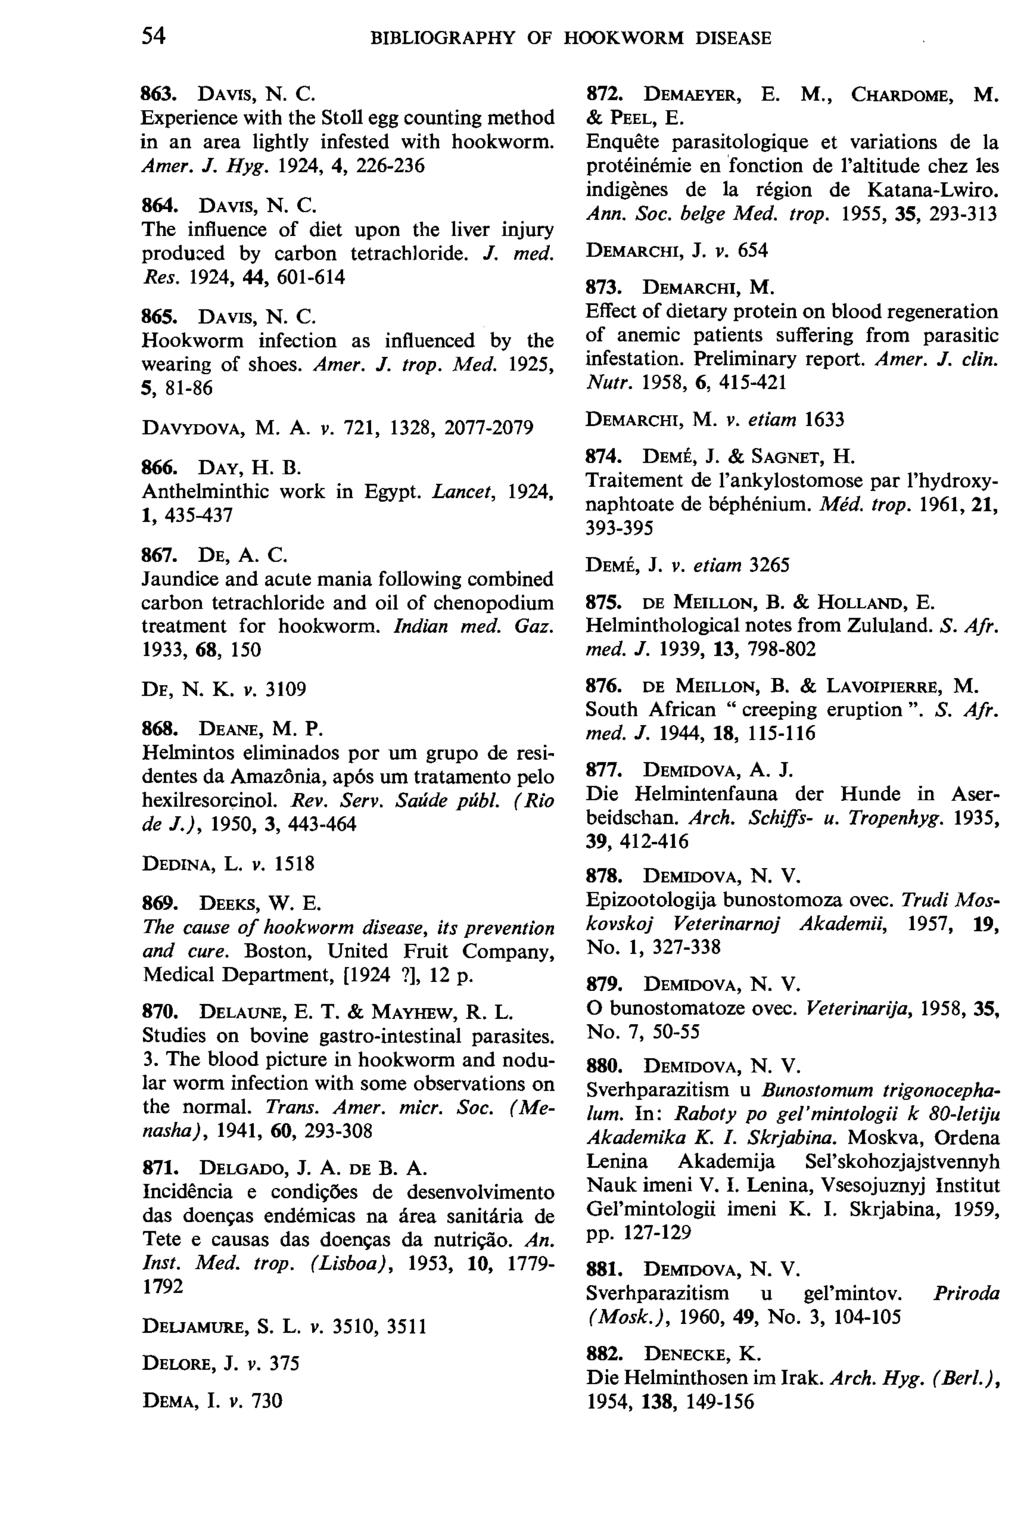 54 BIBLIOGRAPHY OF HOOKWORM DISEASE 863. DAVIS, N. C. Experience with the Stoll egg counting method in an area lightly infested with hookworm. Amer. J. Hyg. 1924, 4, 226-236 864. DAVIS, N. C. The influence of diet upon the liver injury produced by carbon tetrachloride.